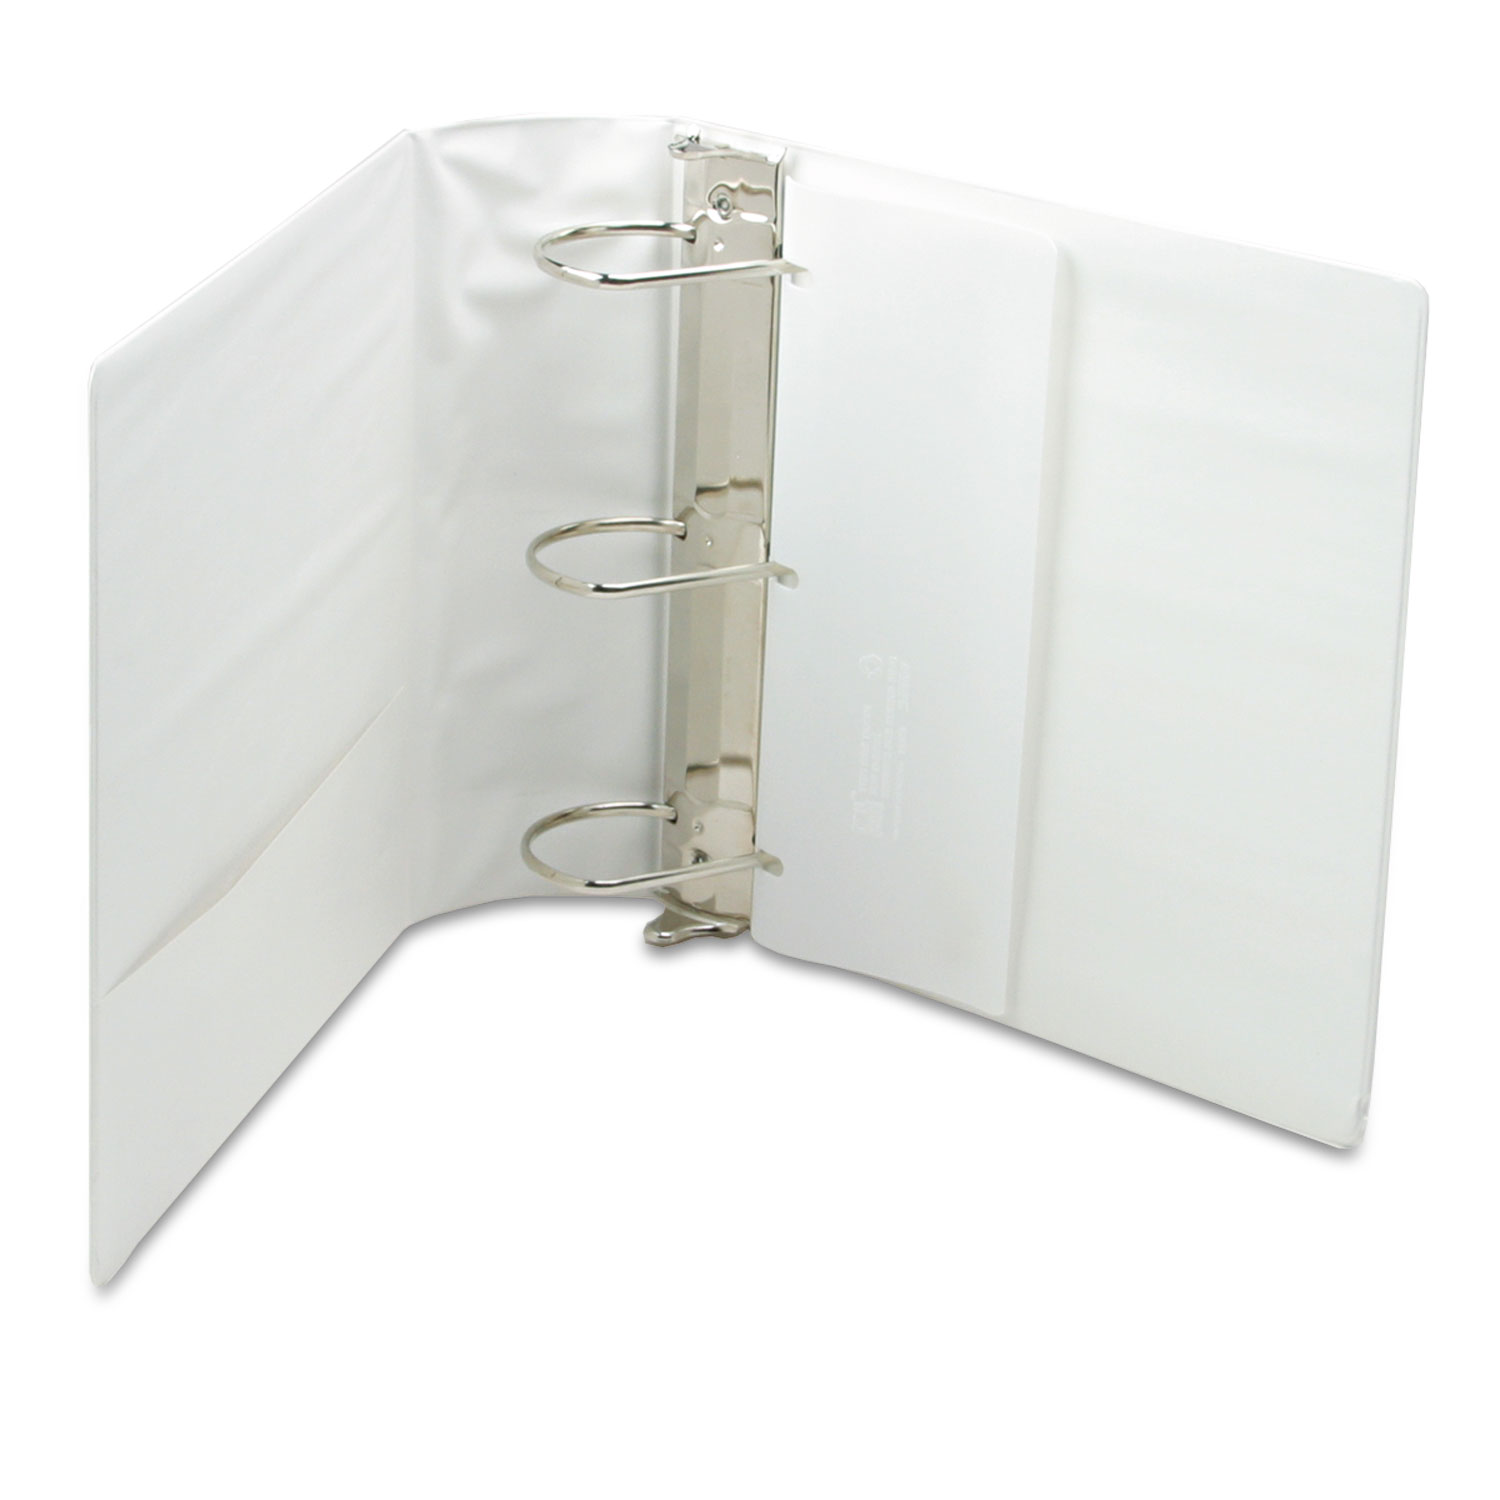 Top Performance DXL Angle-D View Binder, 4 Capacity, White